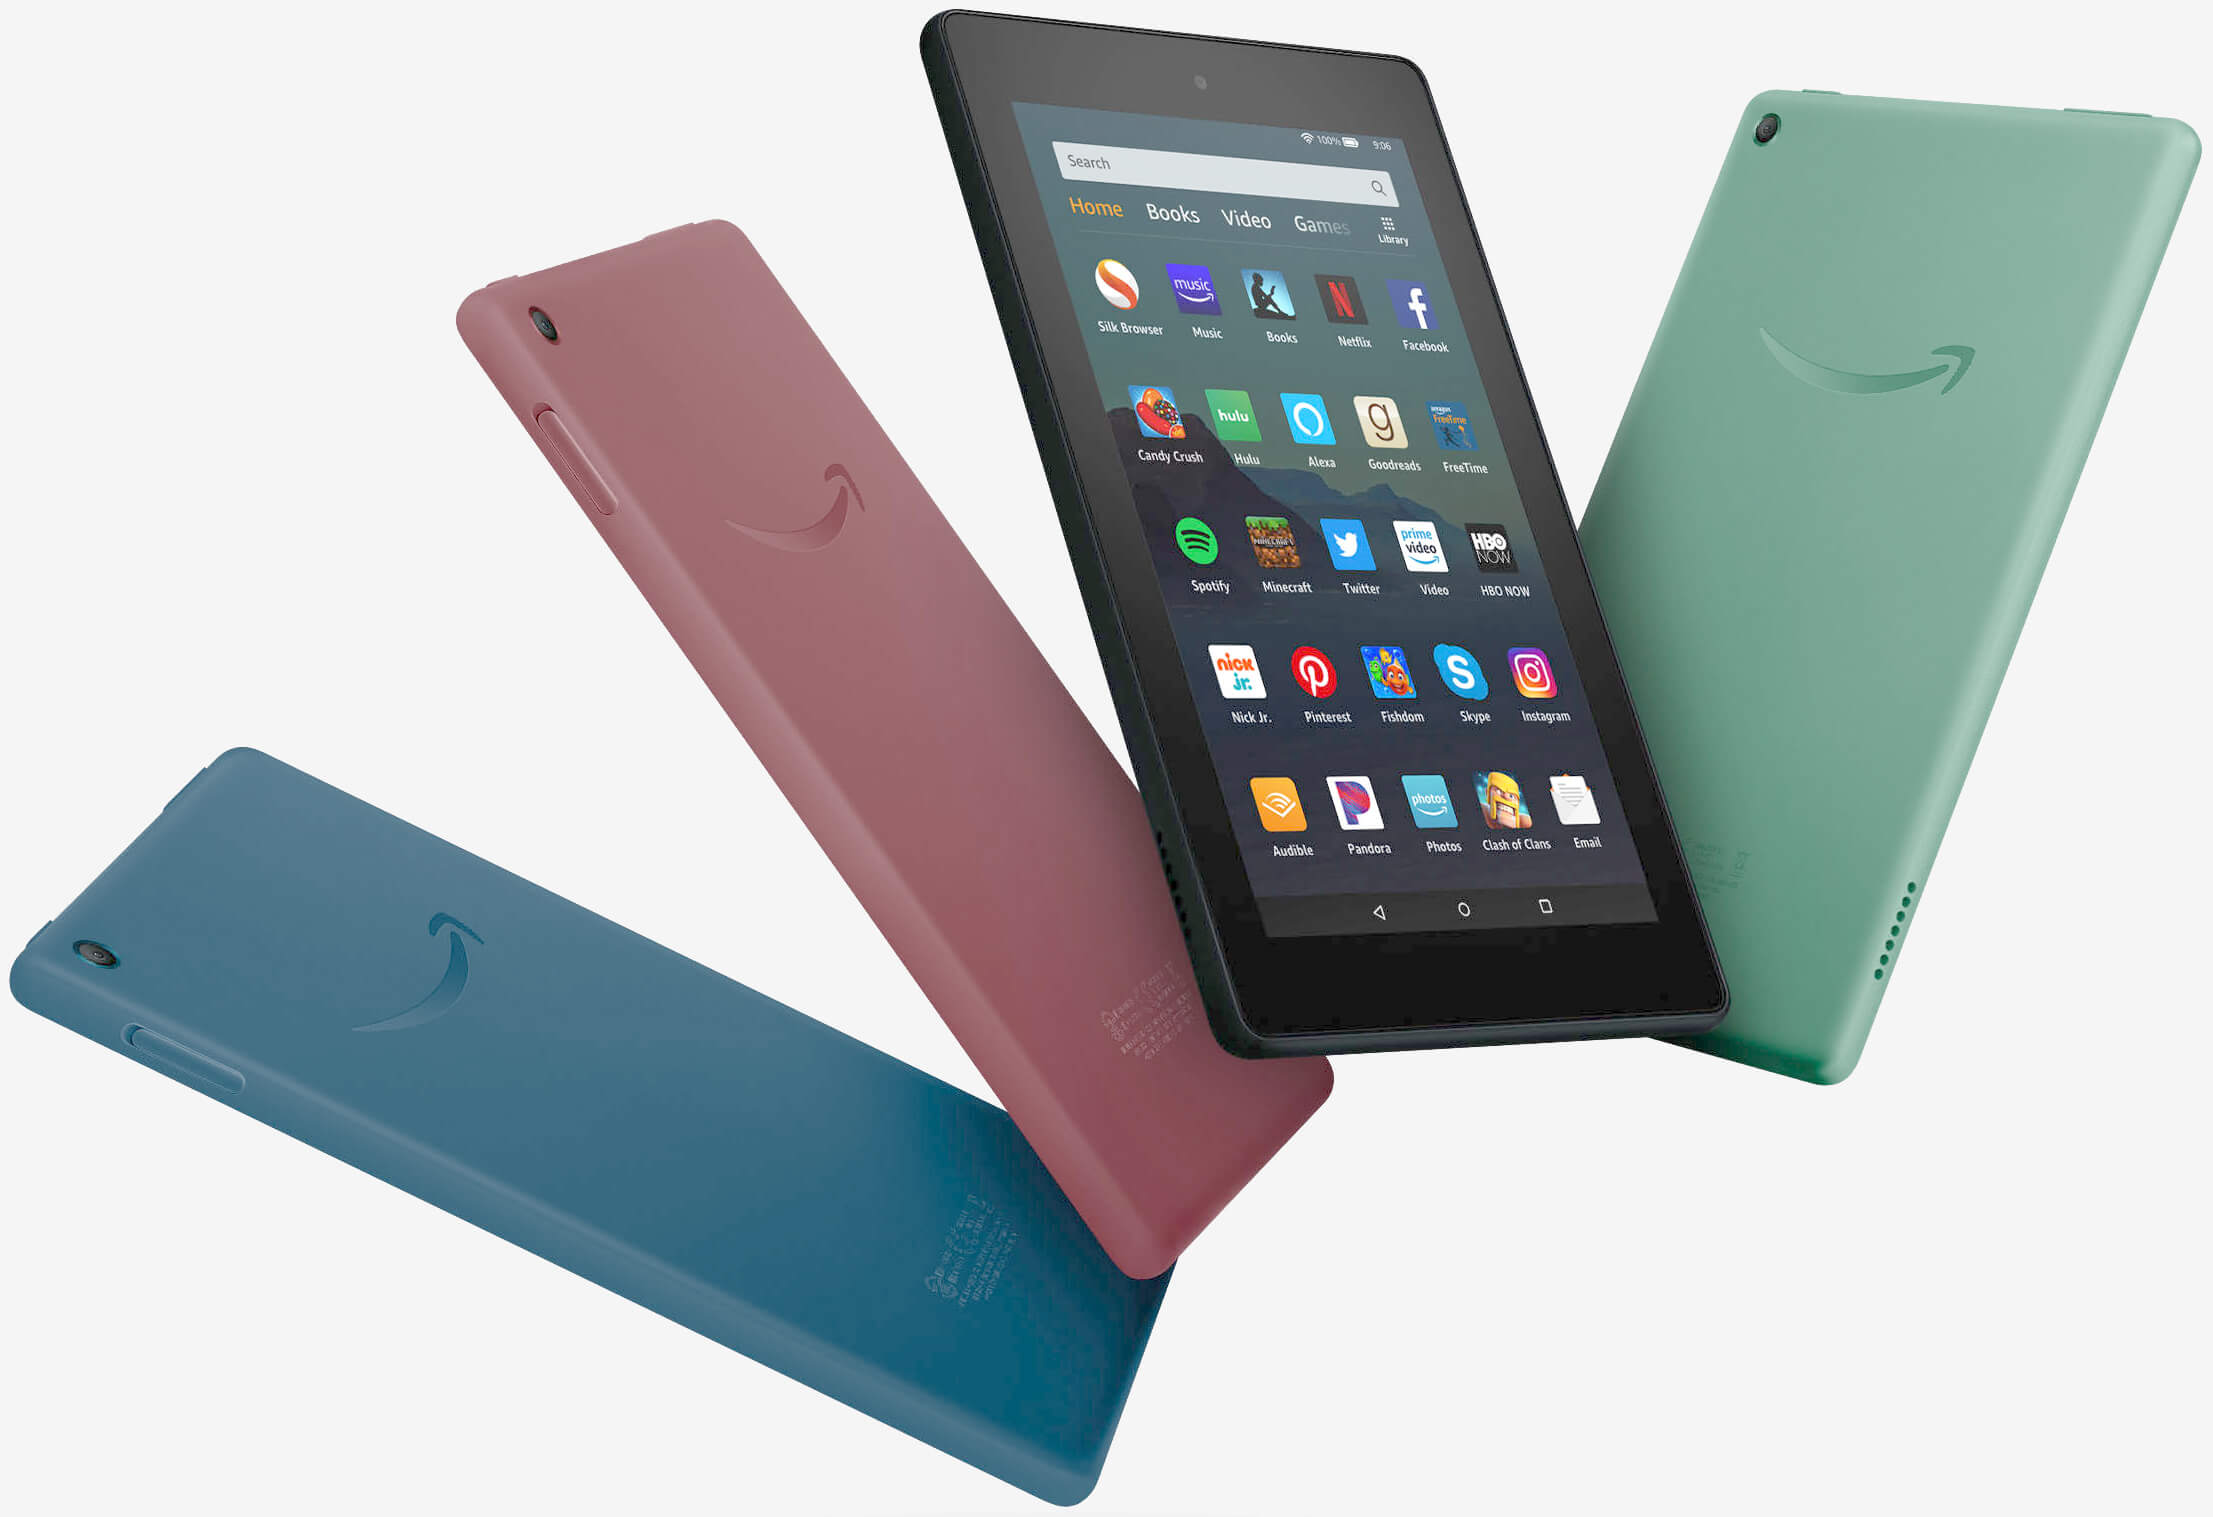 Amazon adds faster processor, more storage to $50 Fire 7 tablet